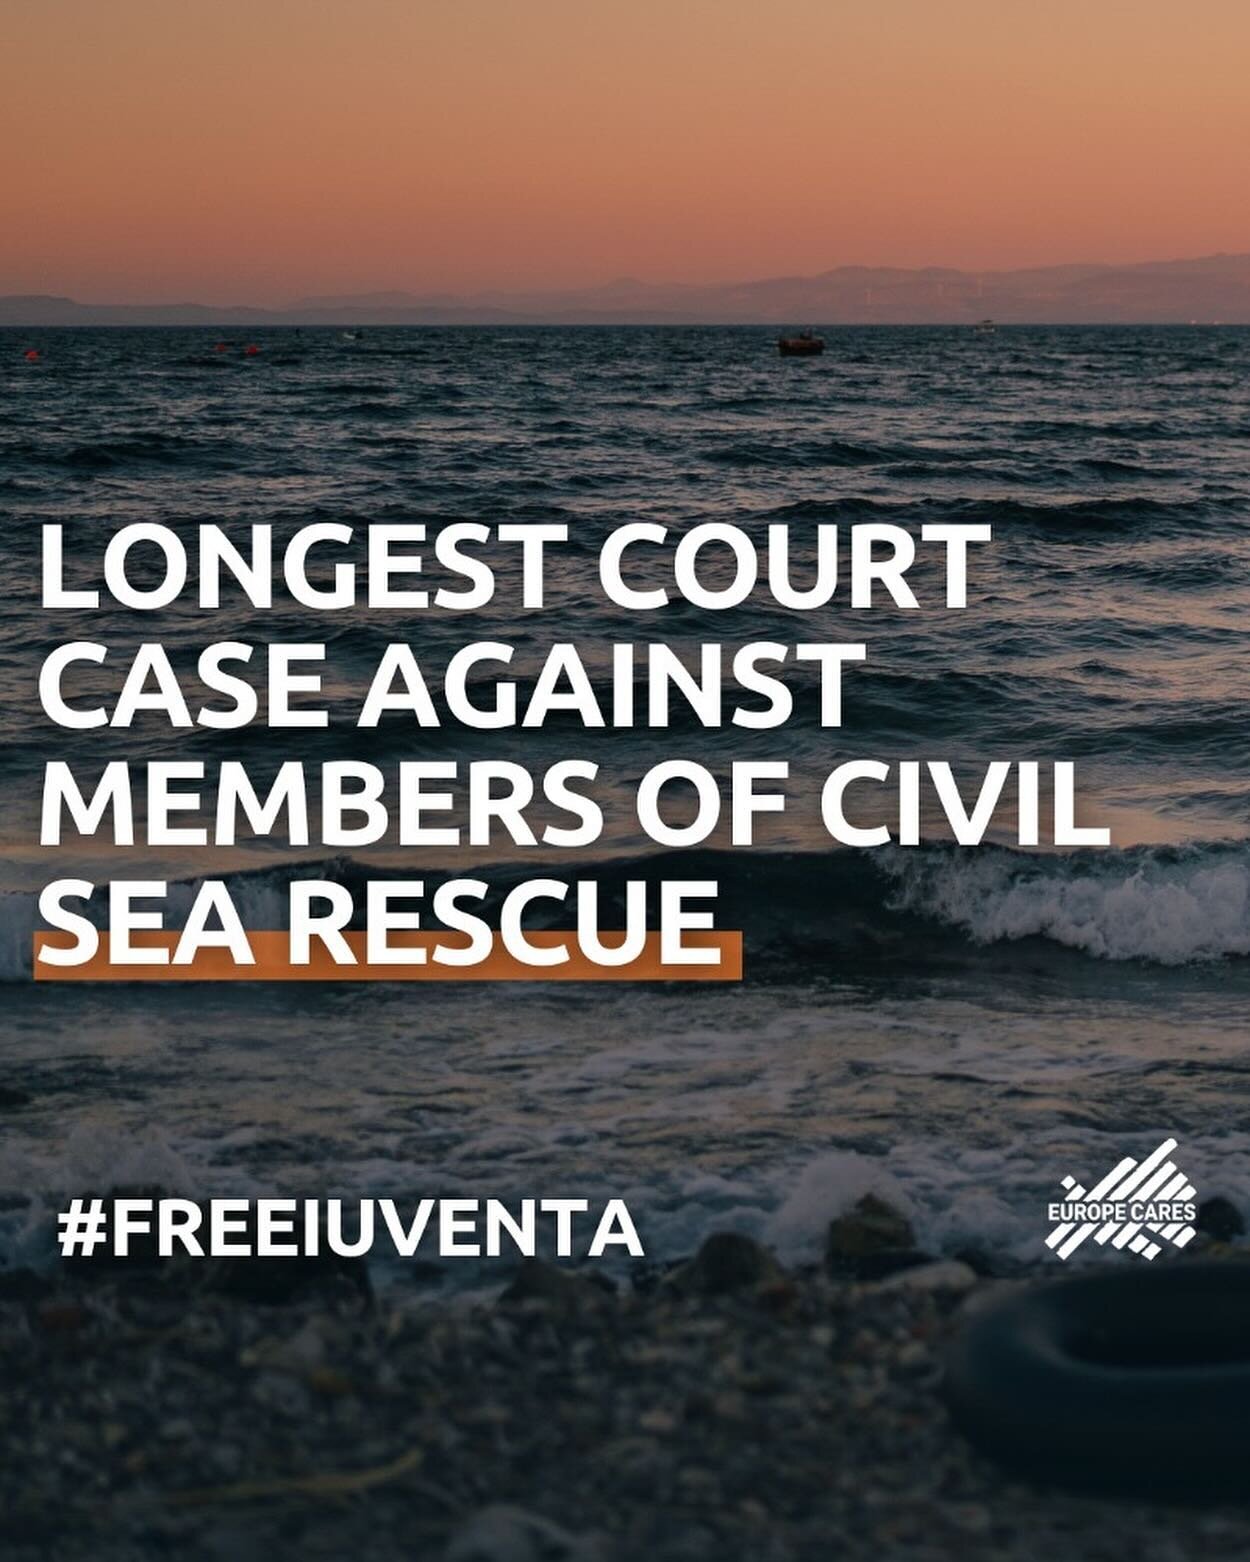 From #Lesvos to #Trapani - #solidarity is still on trial! @iuventacrew 🛟

The @iuventacrew ran hundreds of Search and Rescue operations, saving over 14.000 people until their ship was seized in 2017. Charges have been brought up against individuals 